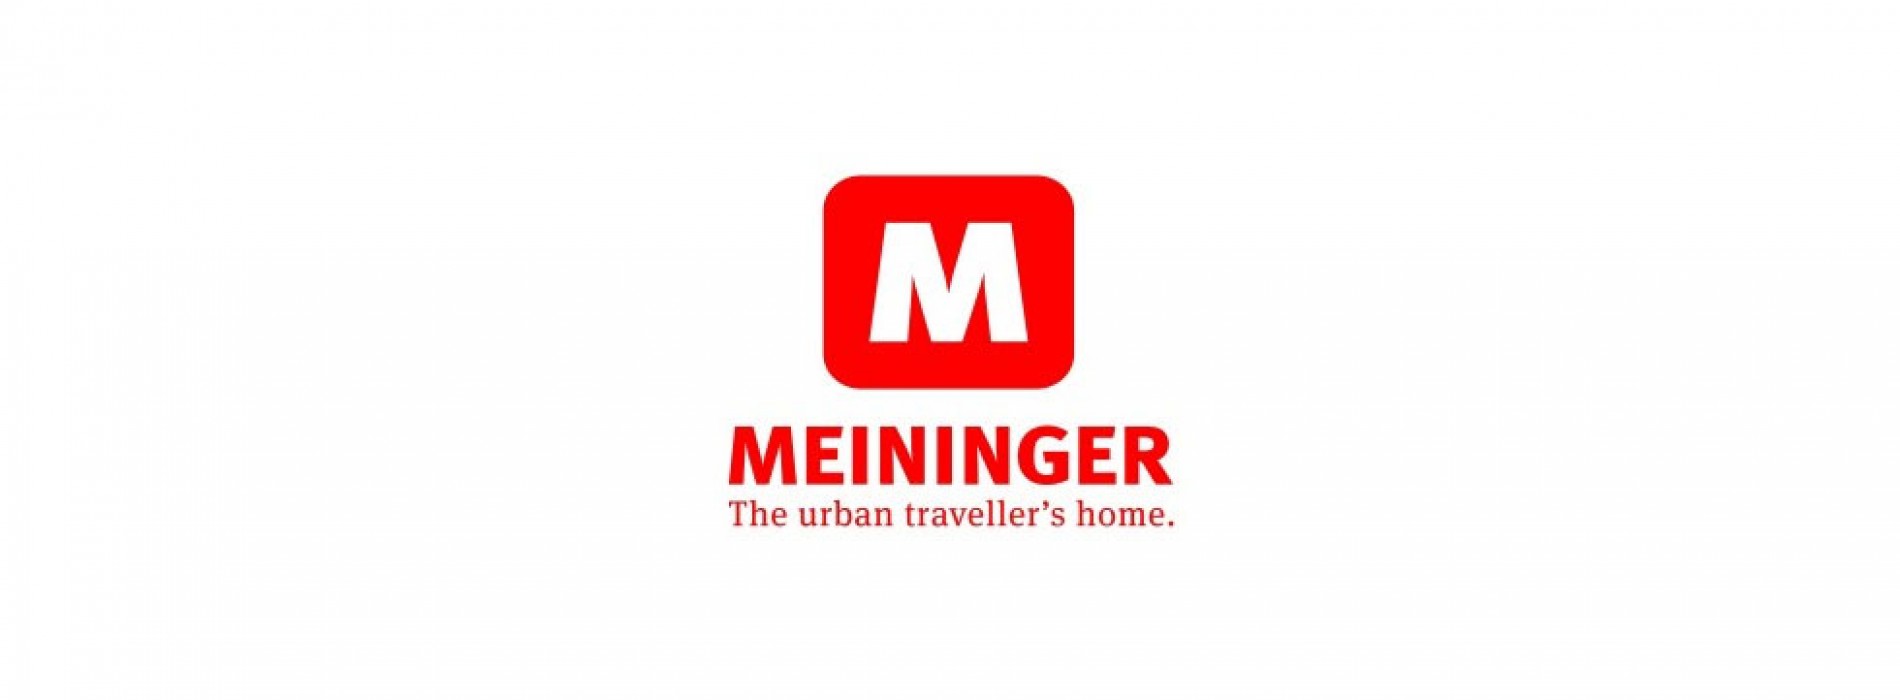 Cox & Kings owned MEININGER Hotels to open a hotel in Leipzig at the beginning of 2017